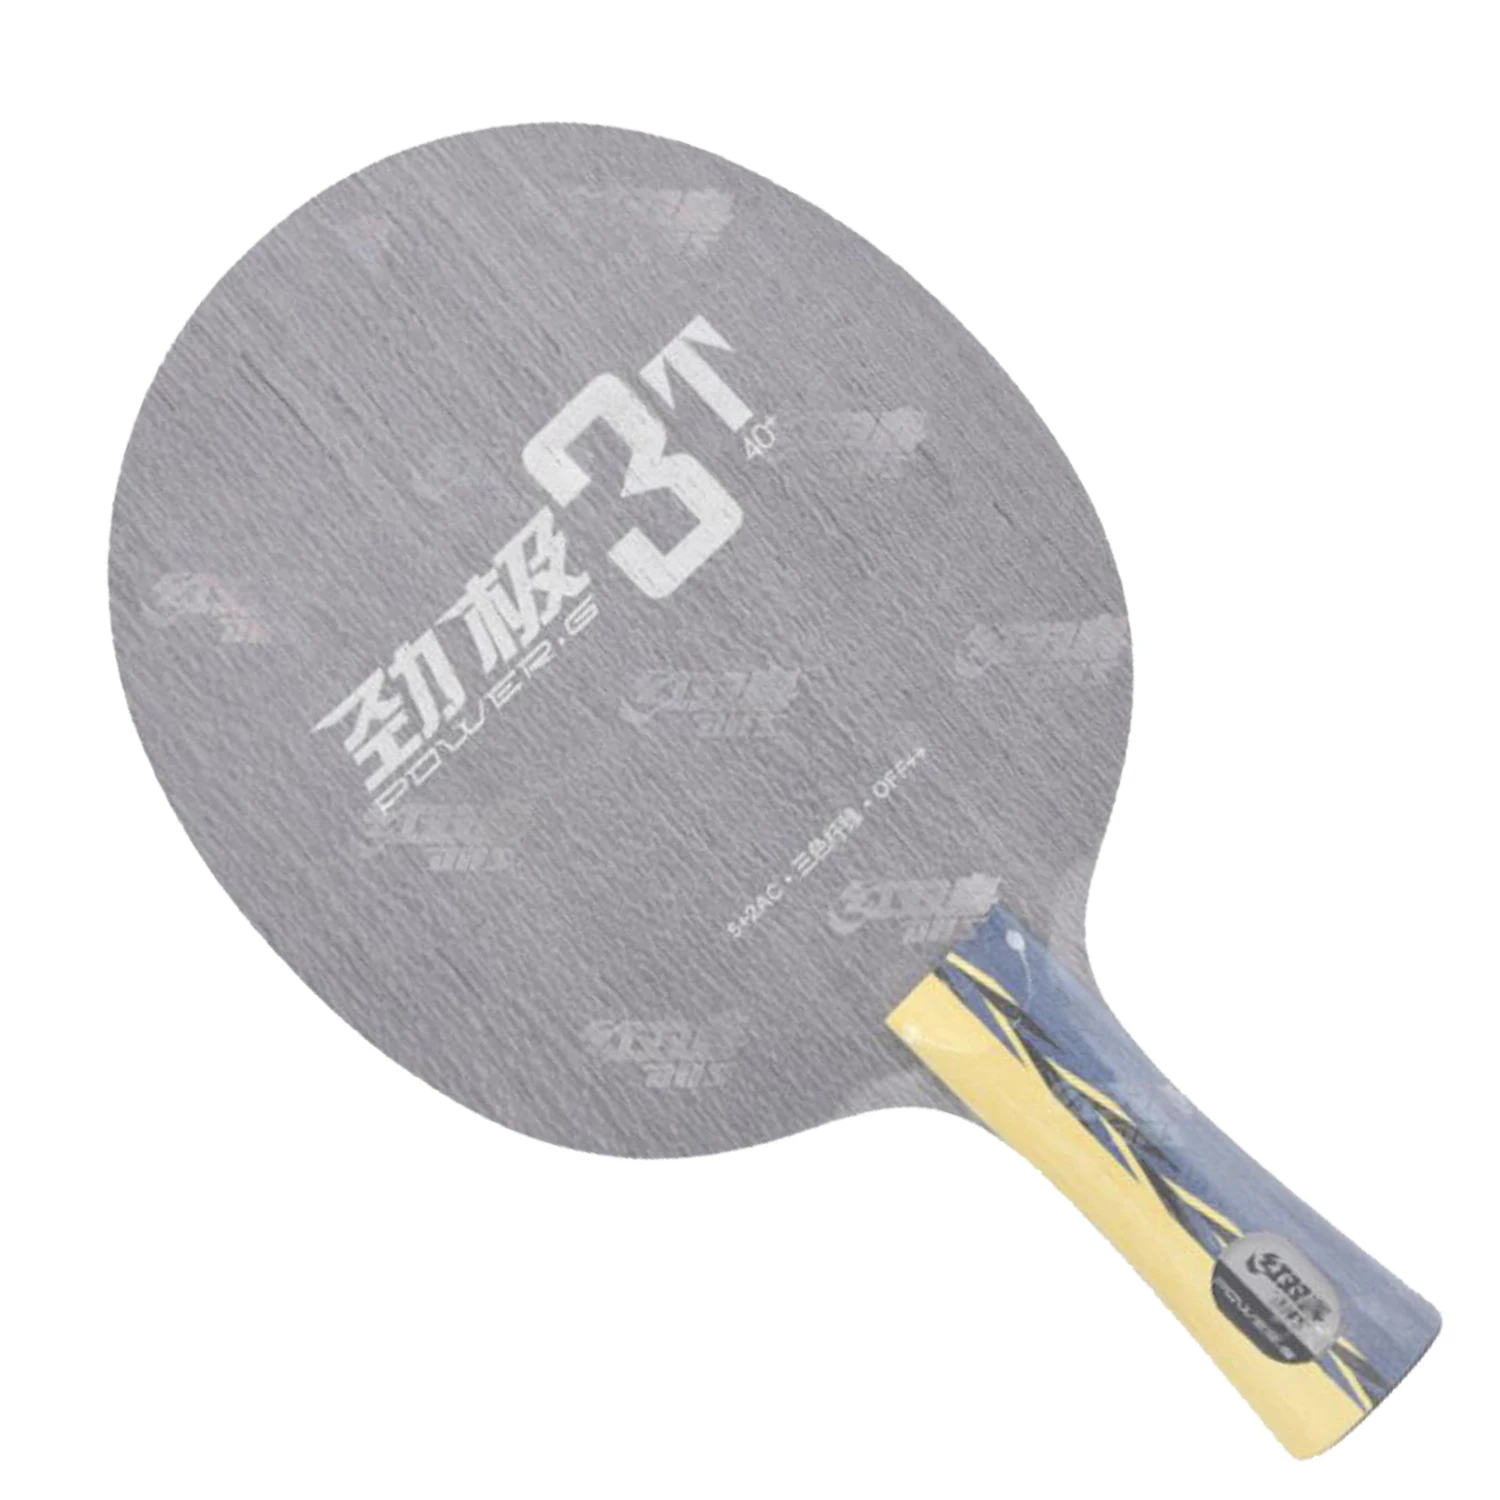 DHS power G 3T PG 3T new table tennis blade for 40+ carbon table tennis racket ping pong game not have table tennis rubber